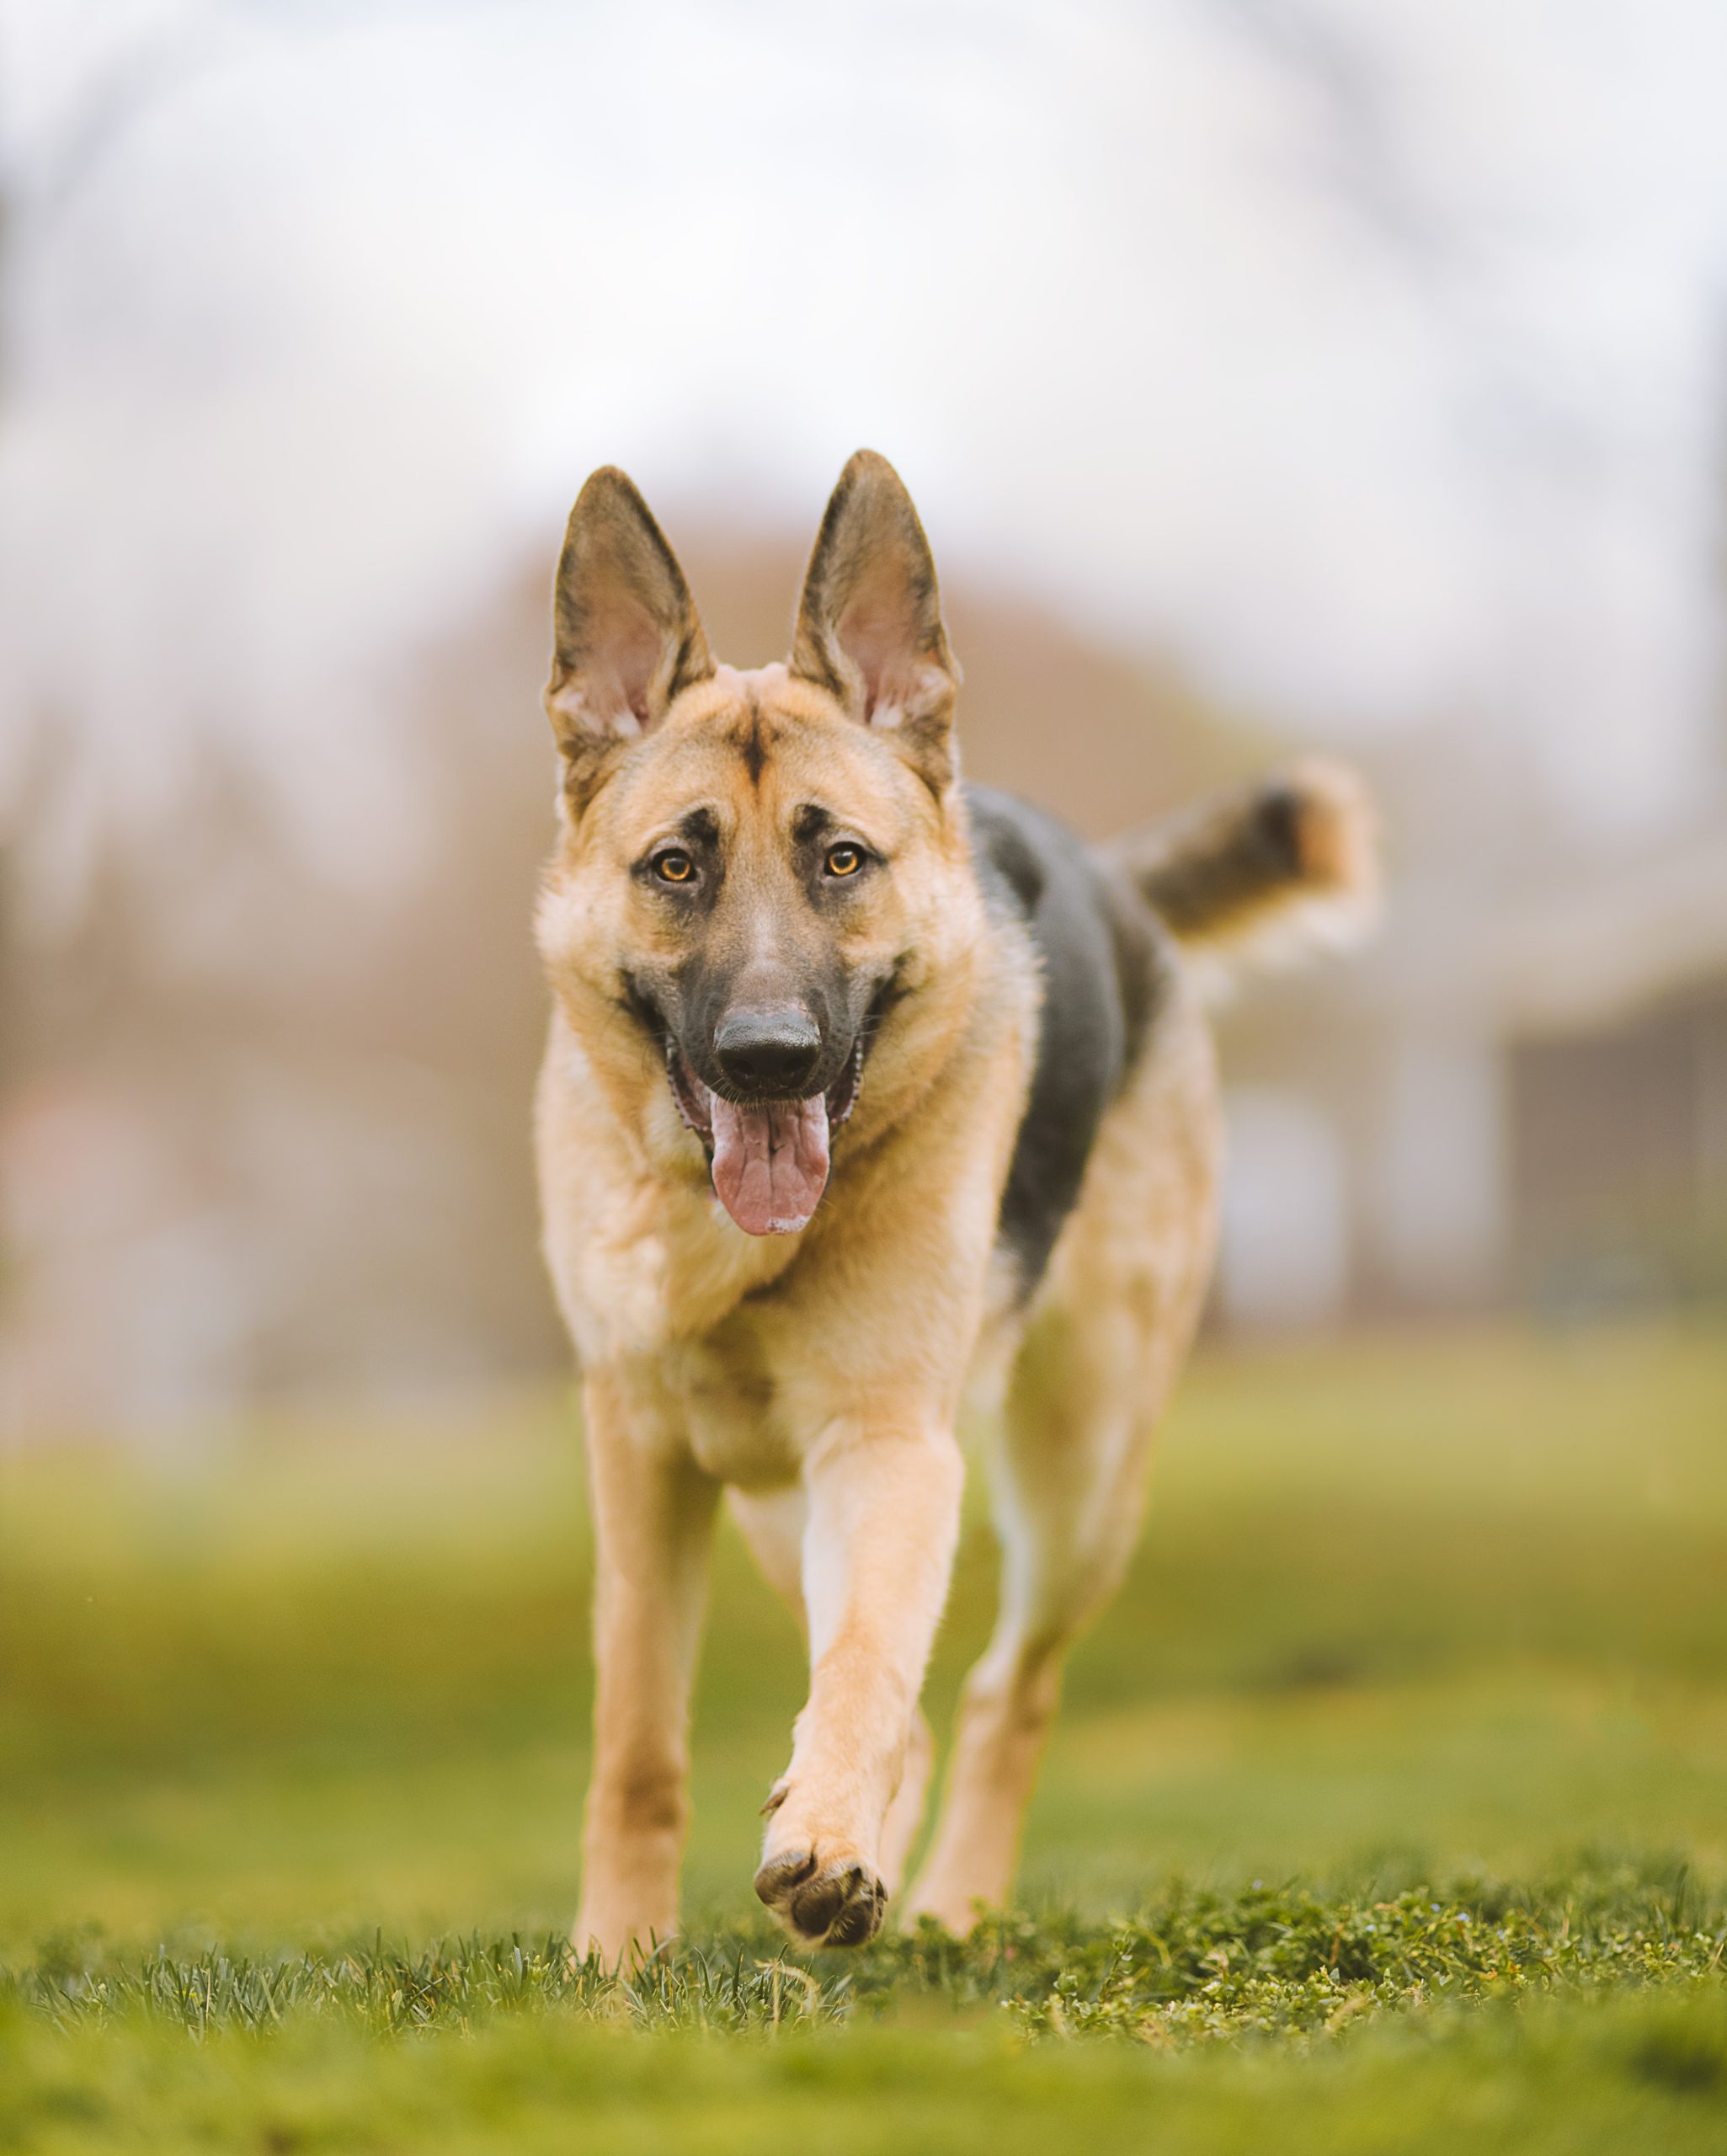 Keeping Senior Dogs Active: The Key Benefits and Exercise Guidelines